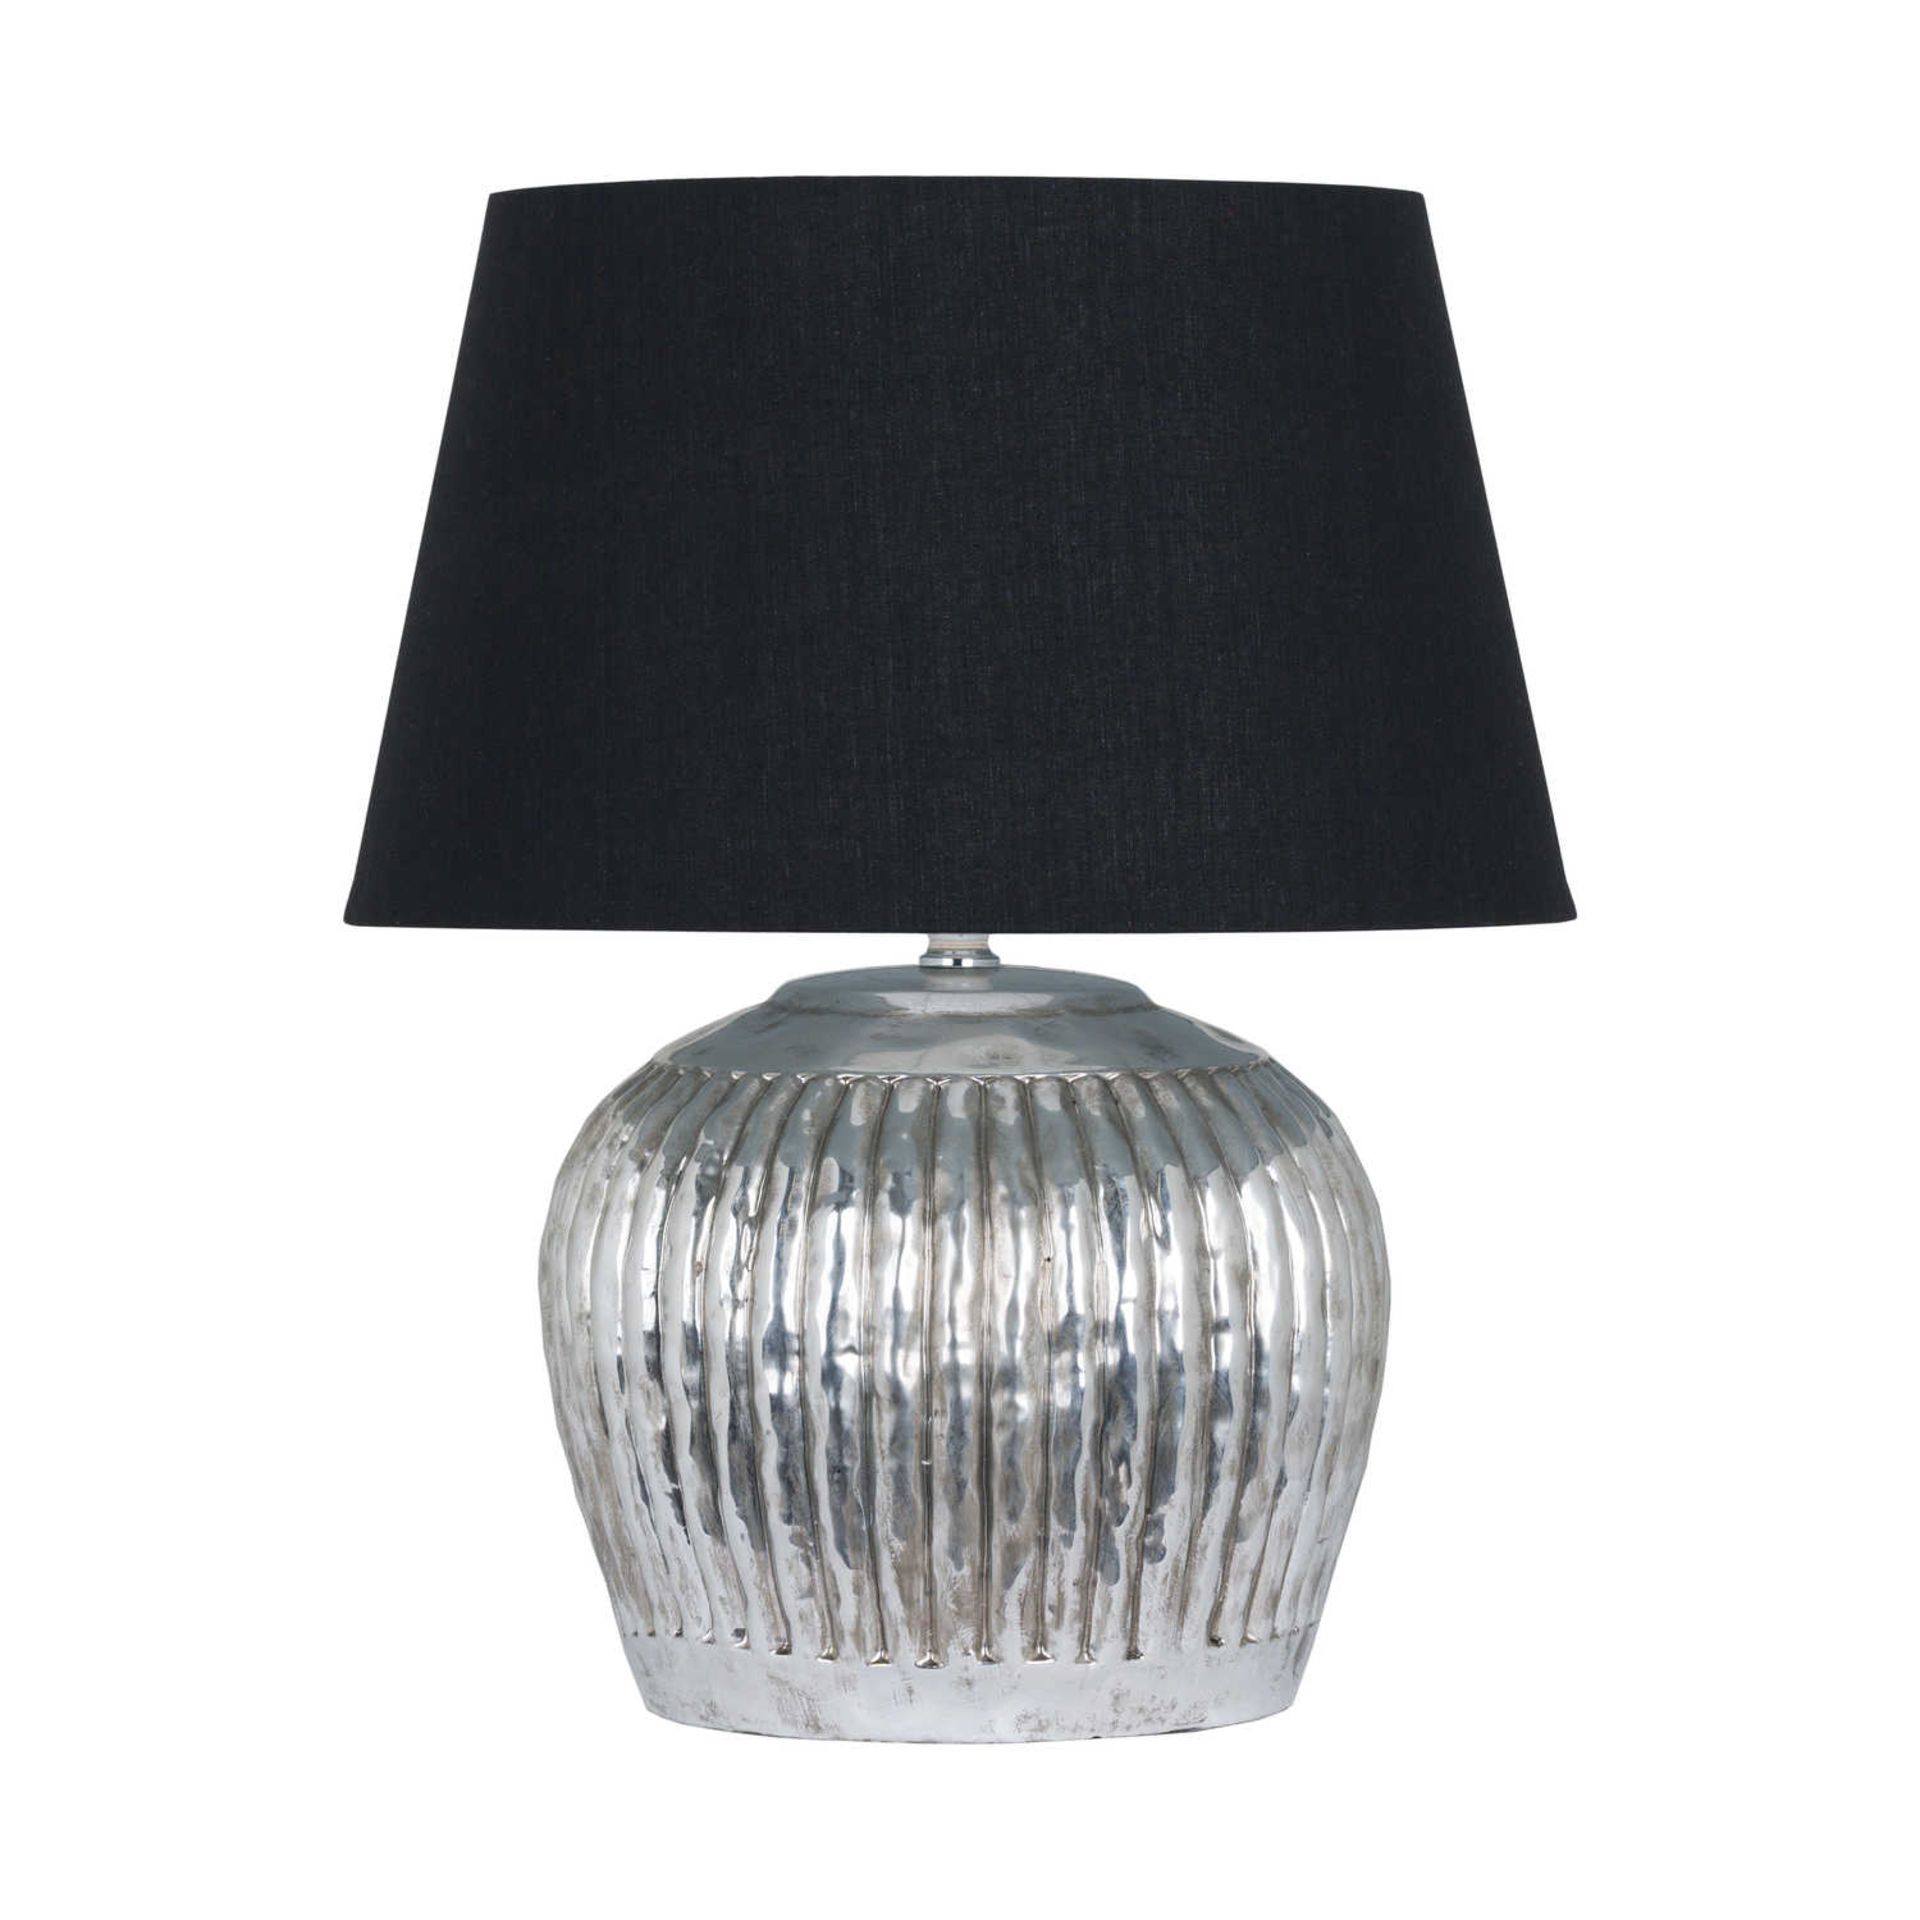 Firenza Silver Ceramic Table Lamp base only This gorgeous Firenza Silver Ceramic Table Lamp Base,